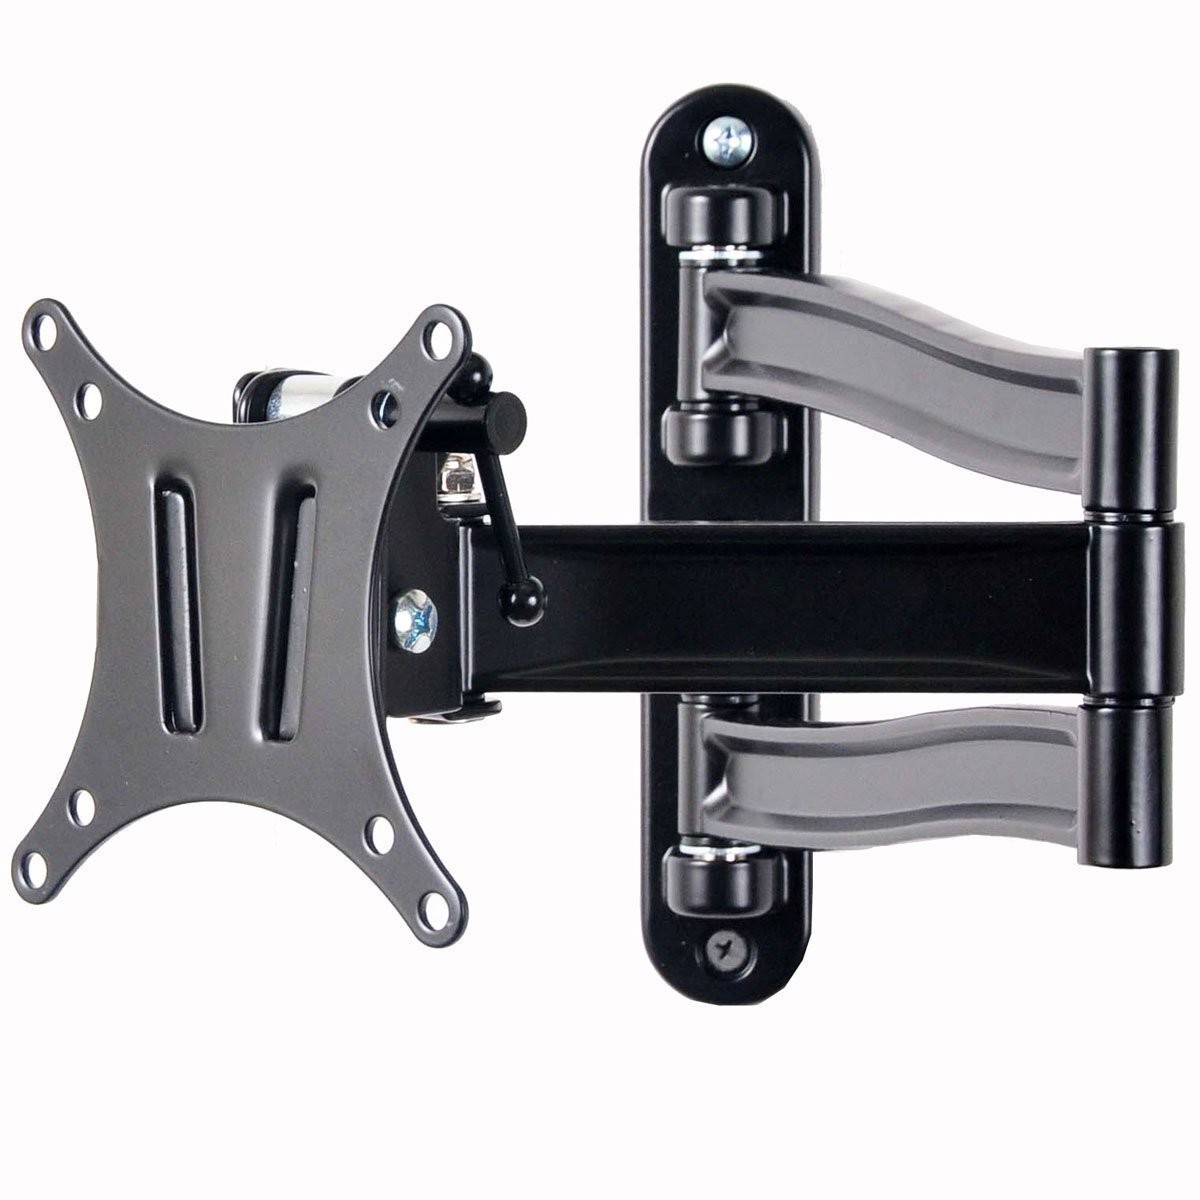 VideoSecu Articulating TV Monitor Wall Mount for 15"-29" Tilt Swivel LCD LED Full Motion Flat Panel Screen Bracket with mounting hole patterns 100x100/75x75mm, Removable Plate CYK - image 1 of 3